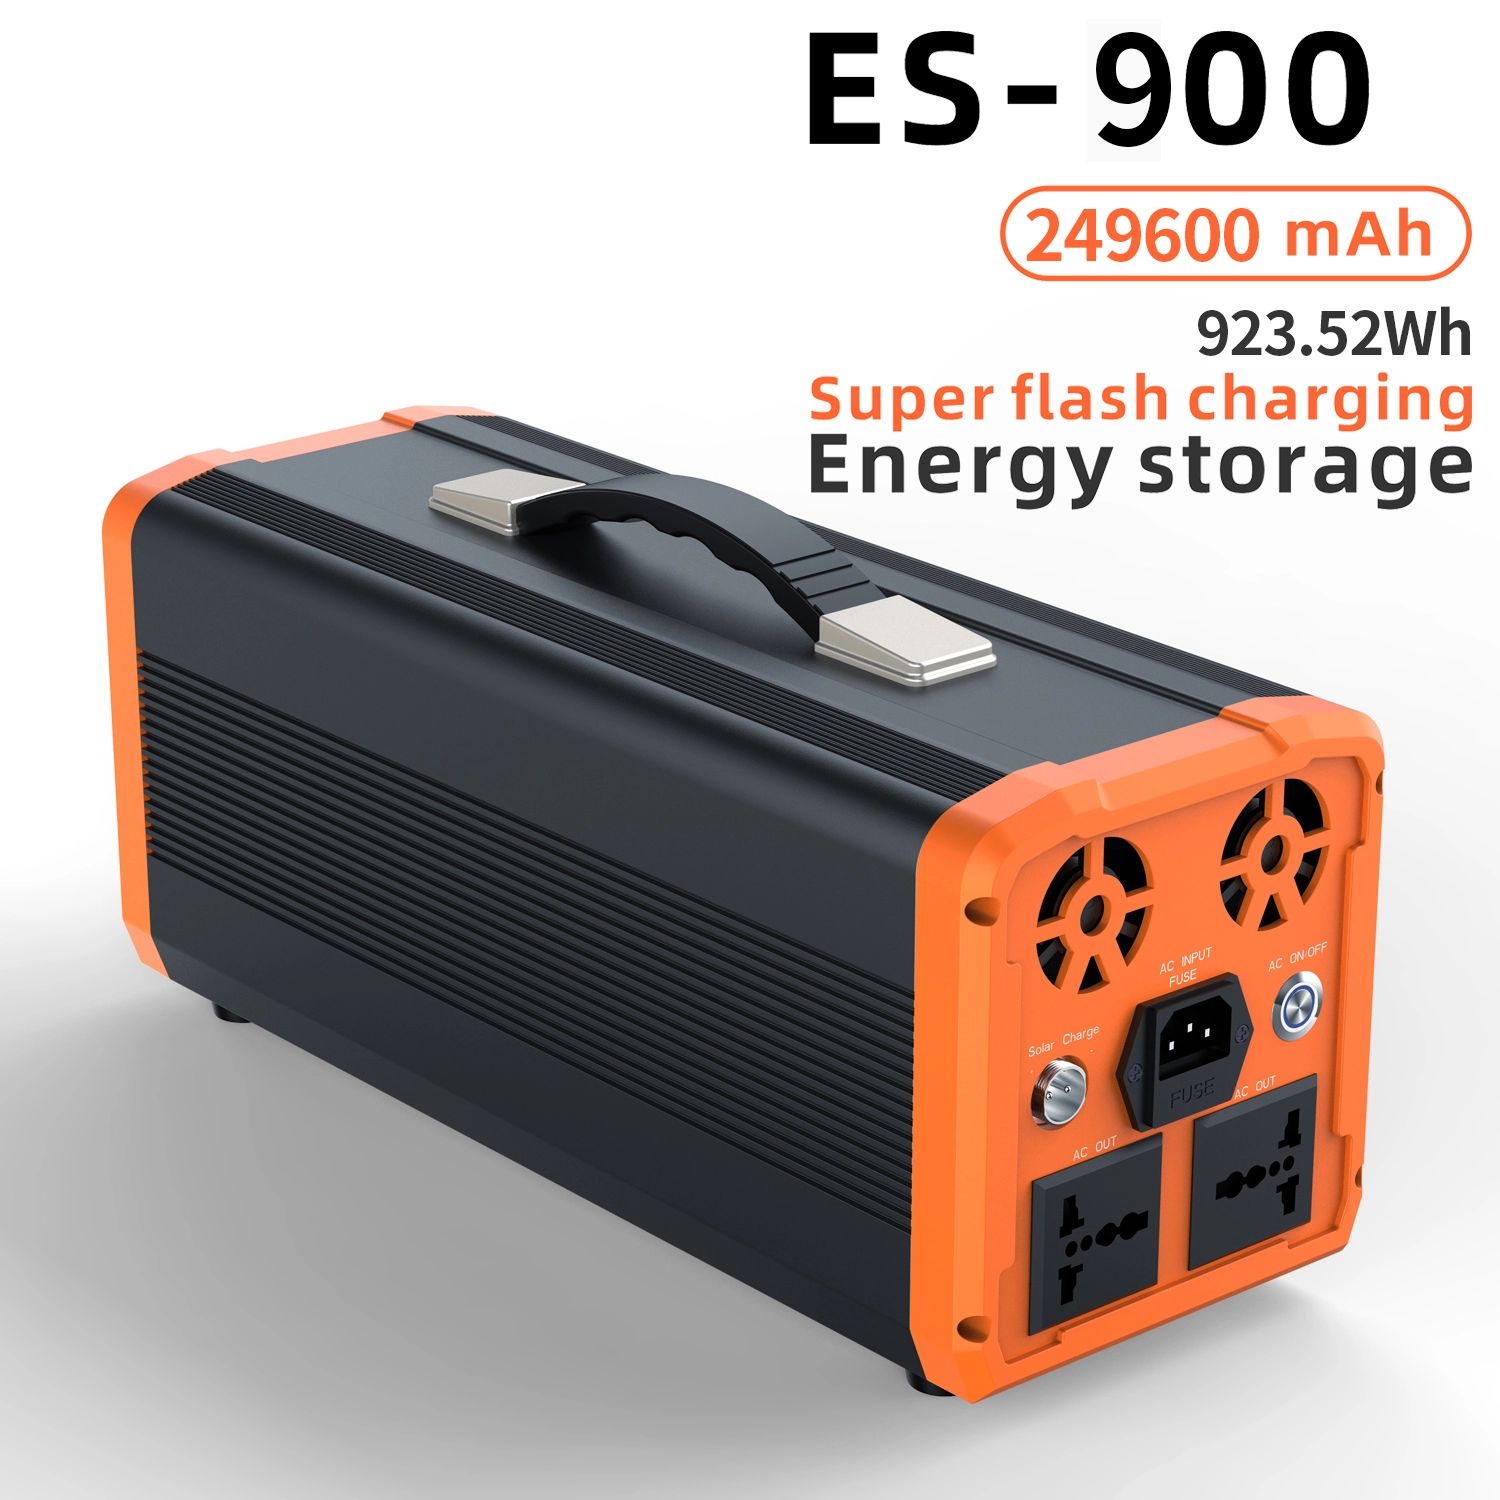 ES-900 Energy Storage Power solar inverter for outdoor use with lithium battery